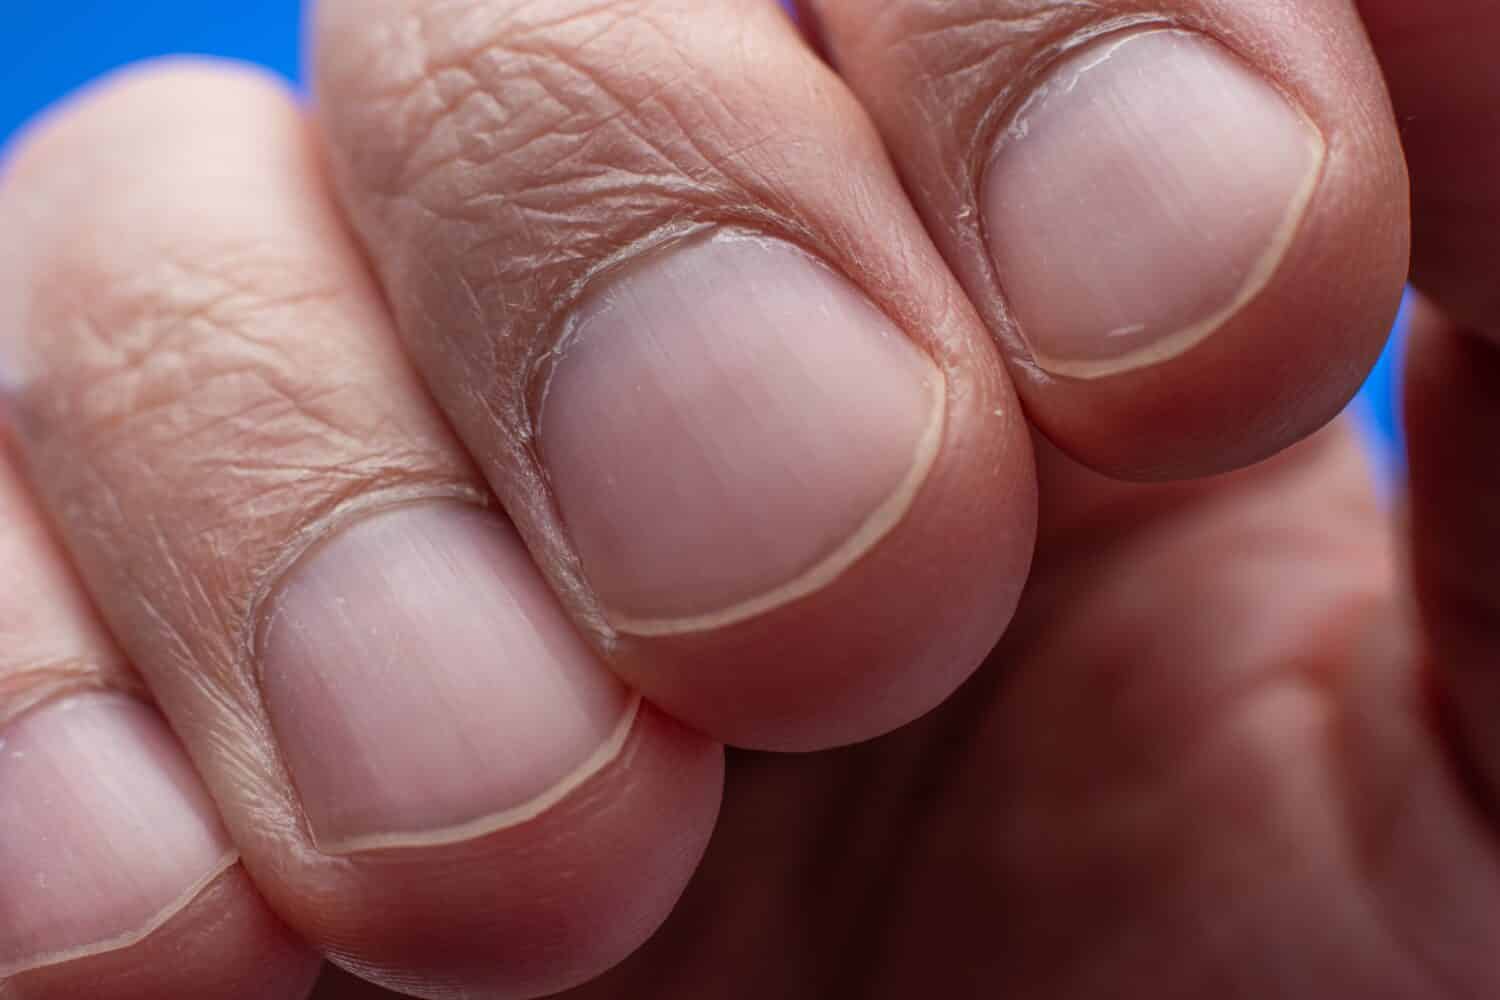 Male fingers and fingernails macro close up shot. Studio shot, no people, isolated on blue background.